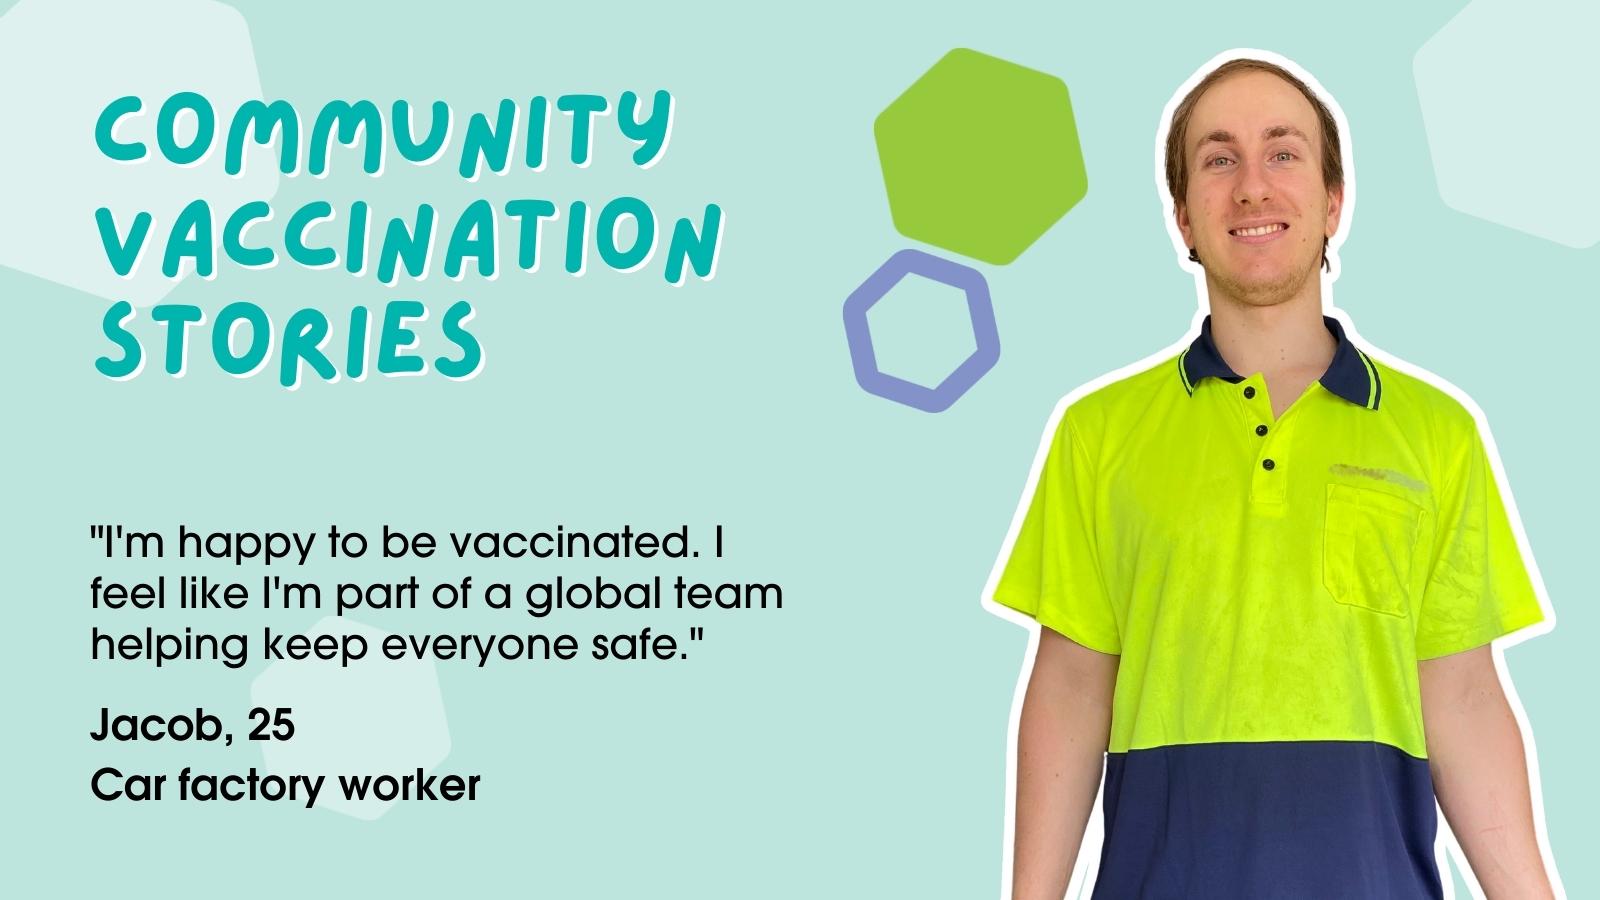 Man smiling. Text reads "Community vaccination stories" "I'm happy to be vaccinated. I feel like I'm part of a global team helping keep people safe." - Jacob, 25, car factory worker